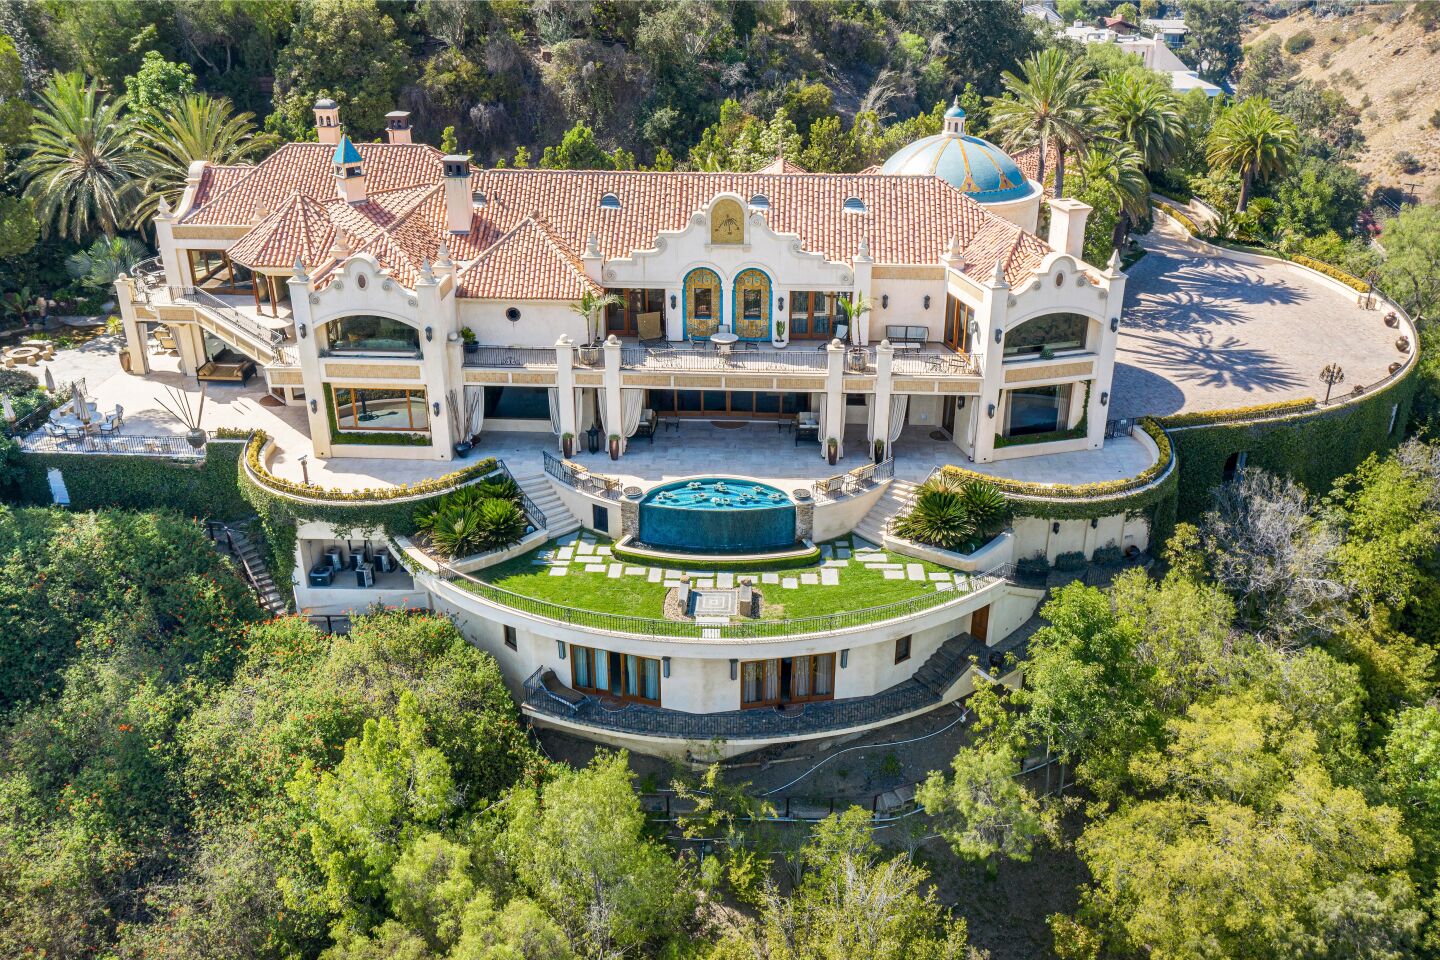 The 21,000-square-foot mansion.